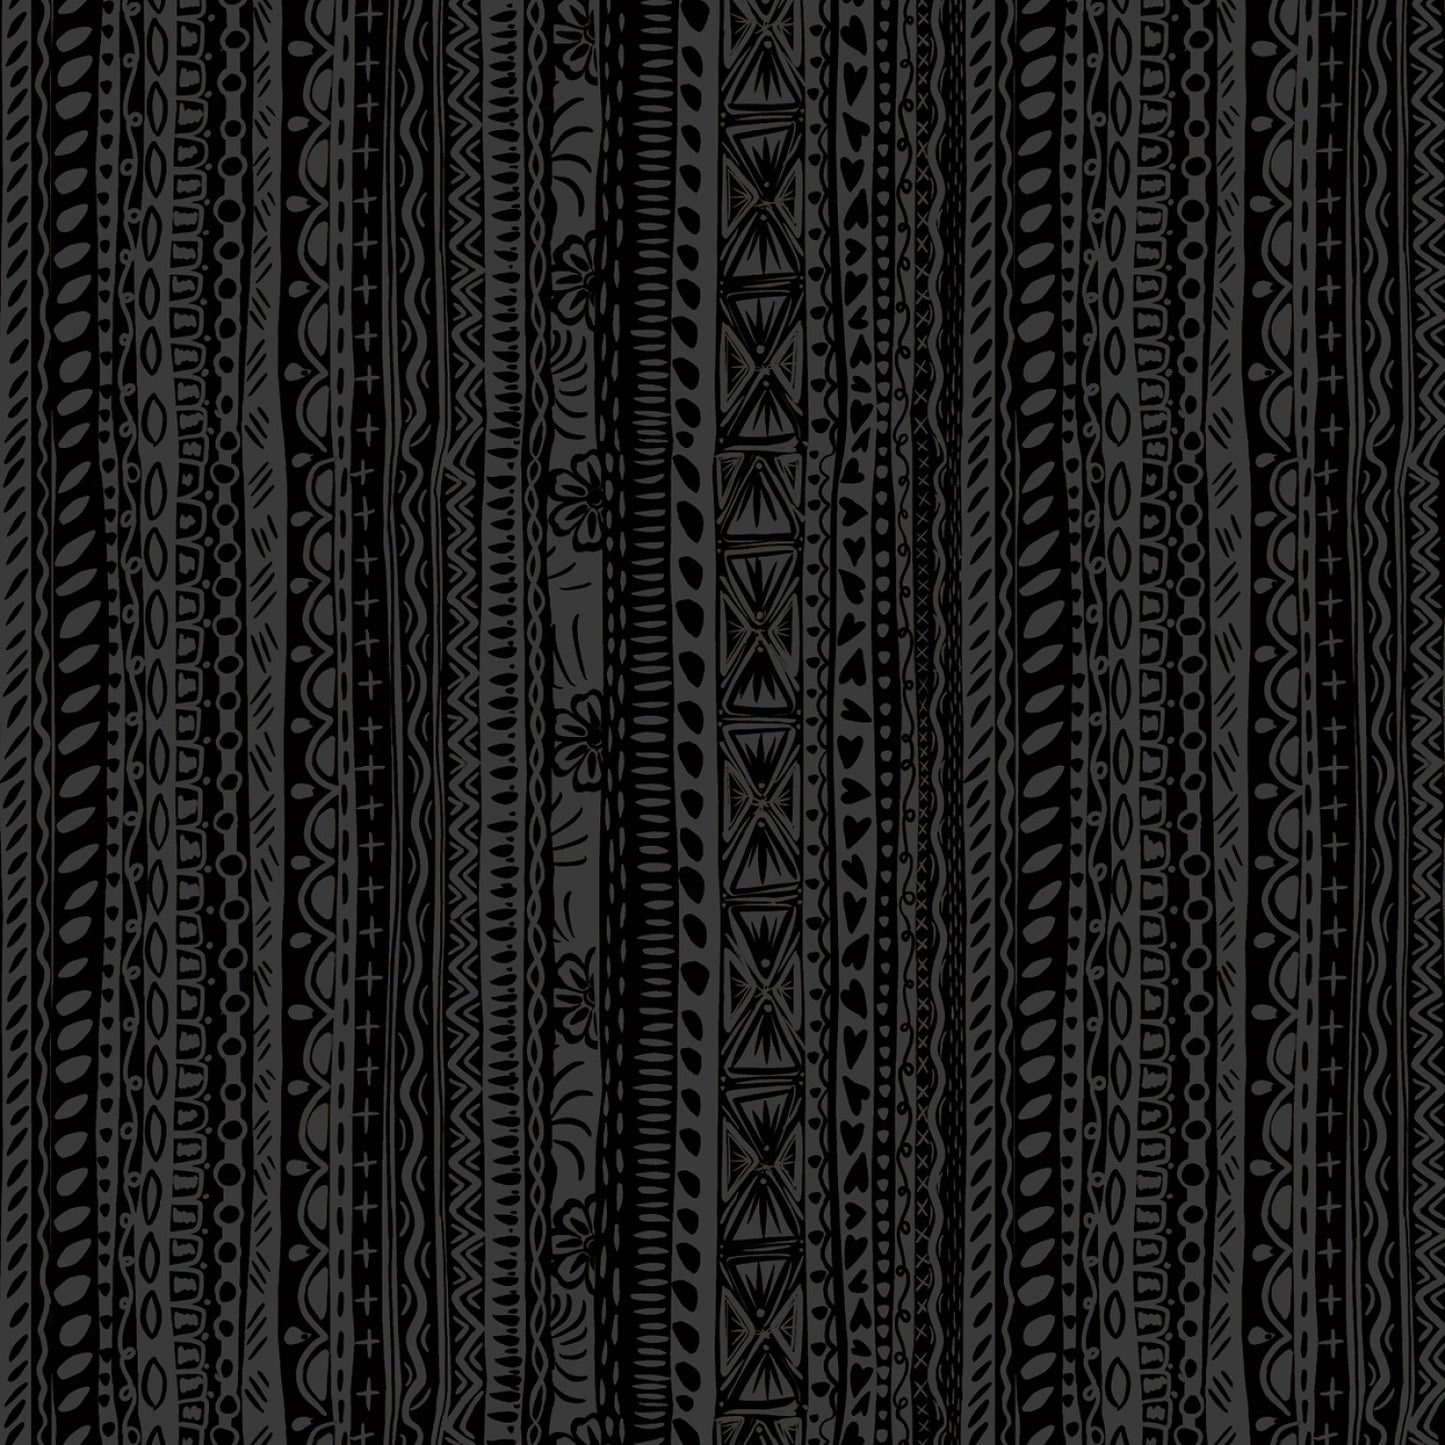 Amor Eterno by Crafty Chica Stripes Black    C11814R-BLACK Cotton Woven Fabric